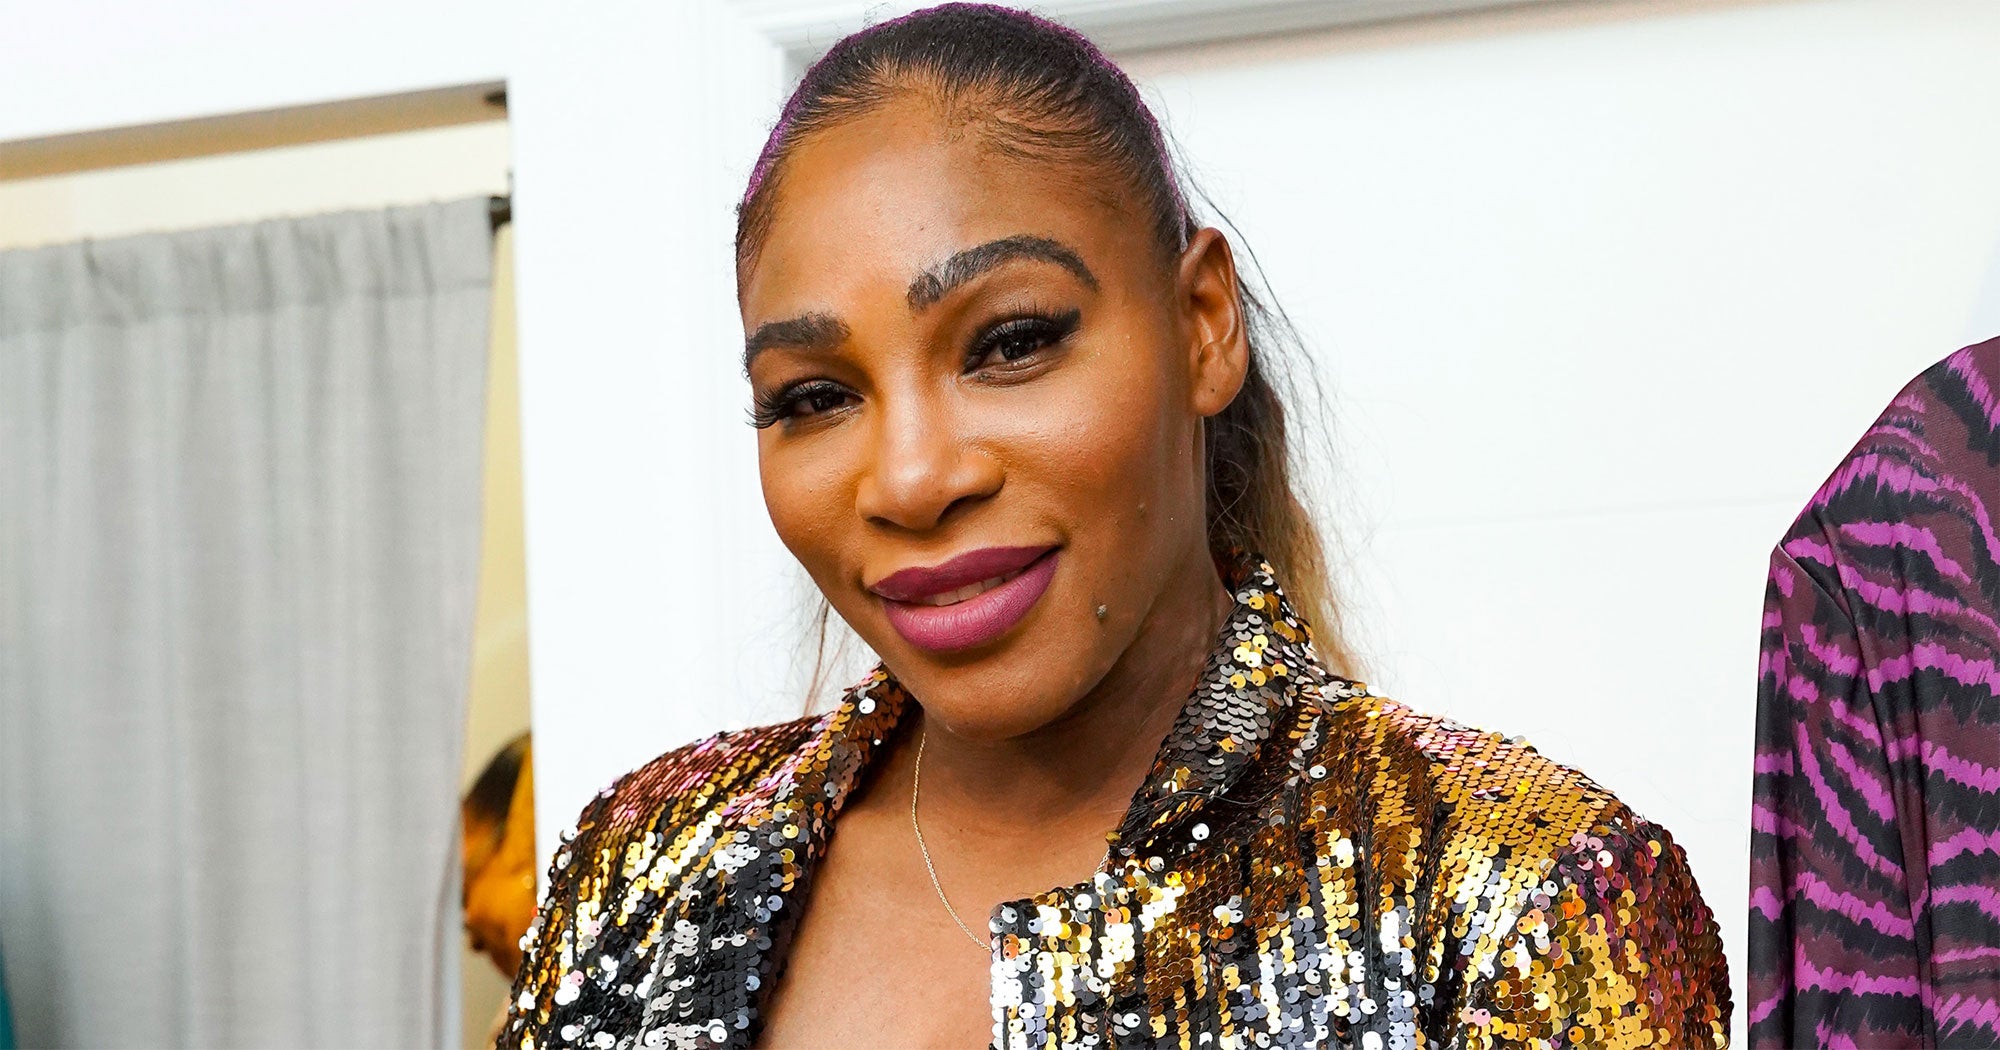 Serena Williams Takes On 2019’s Biggest Hair Trend, Yacht-Style